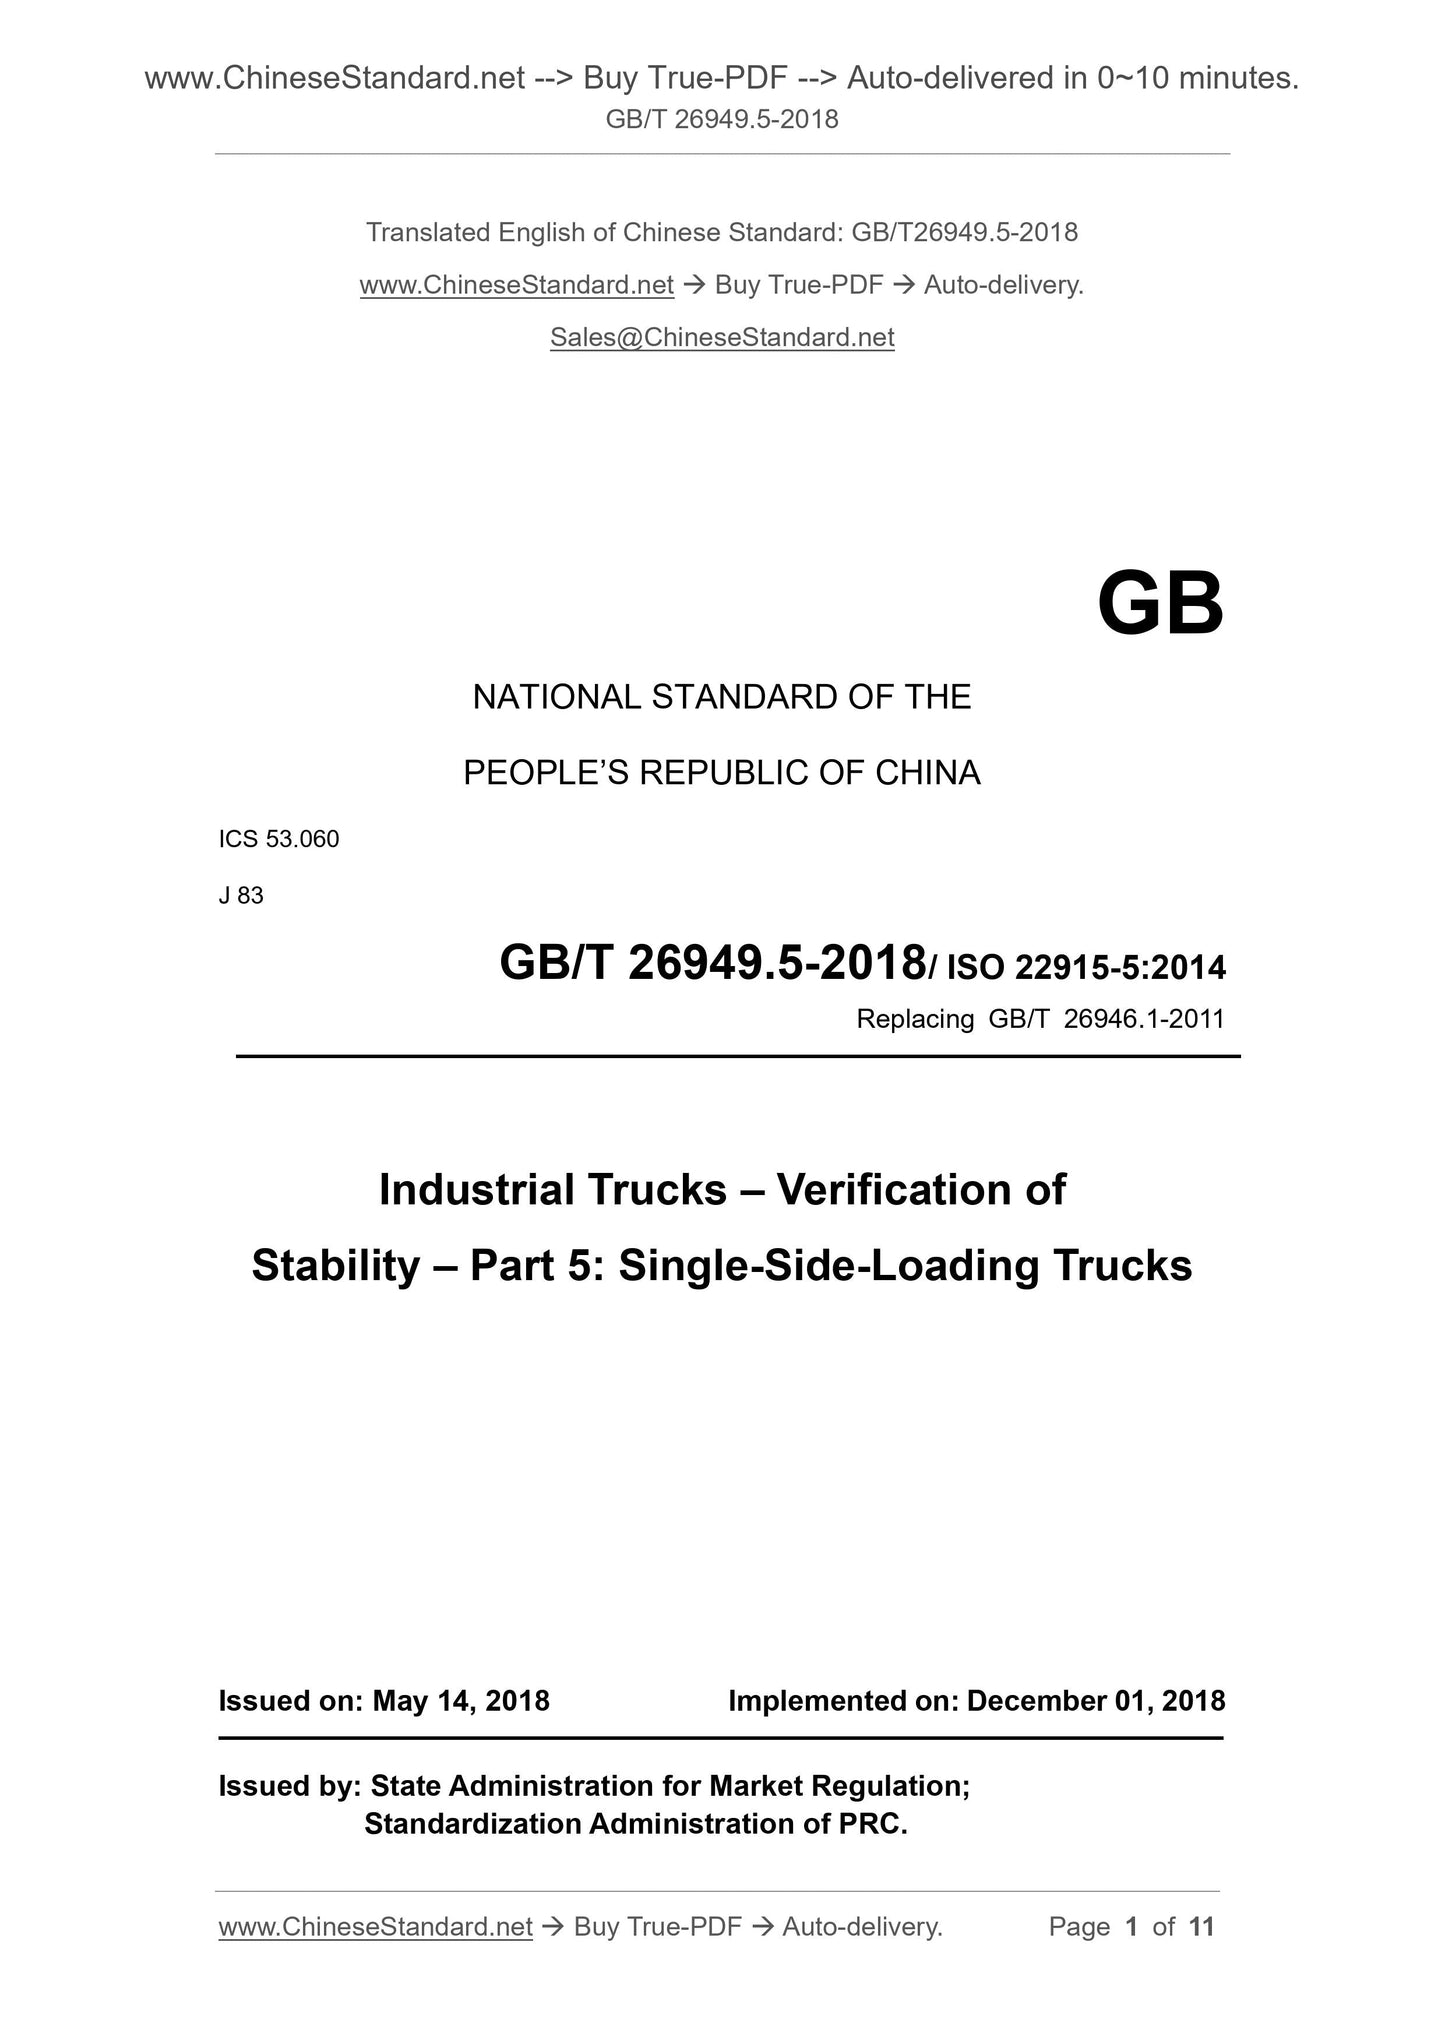 GB/T 26949.5-2018 Page 1